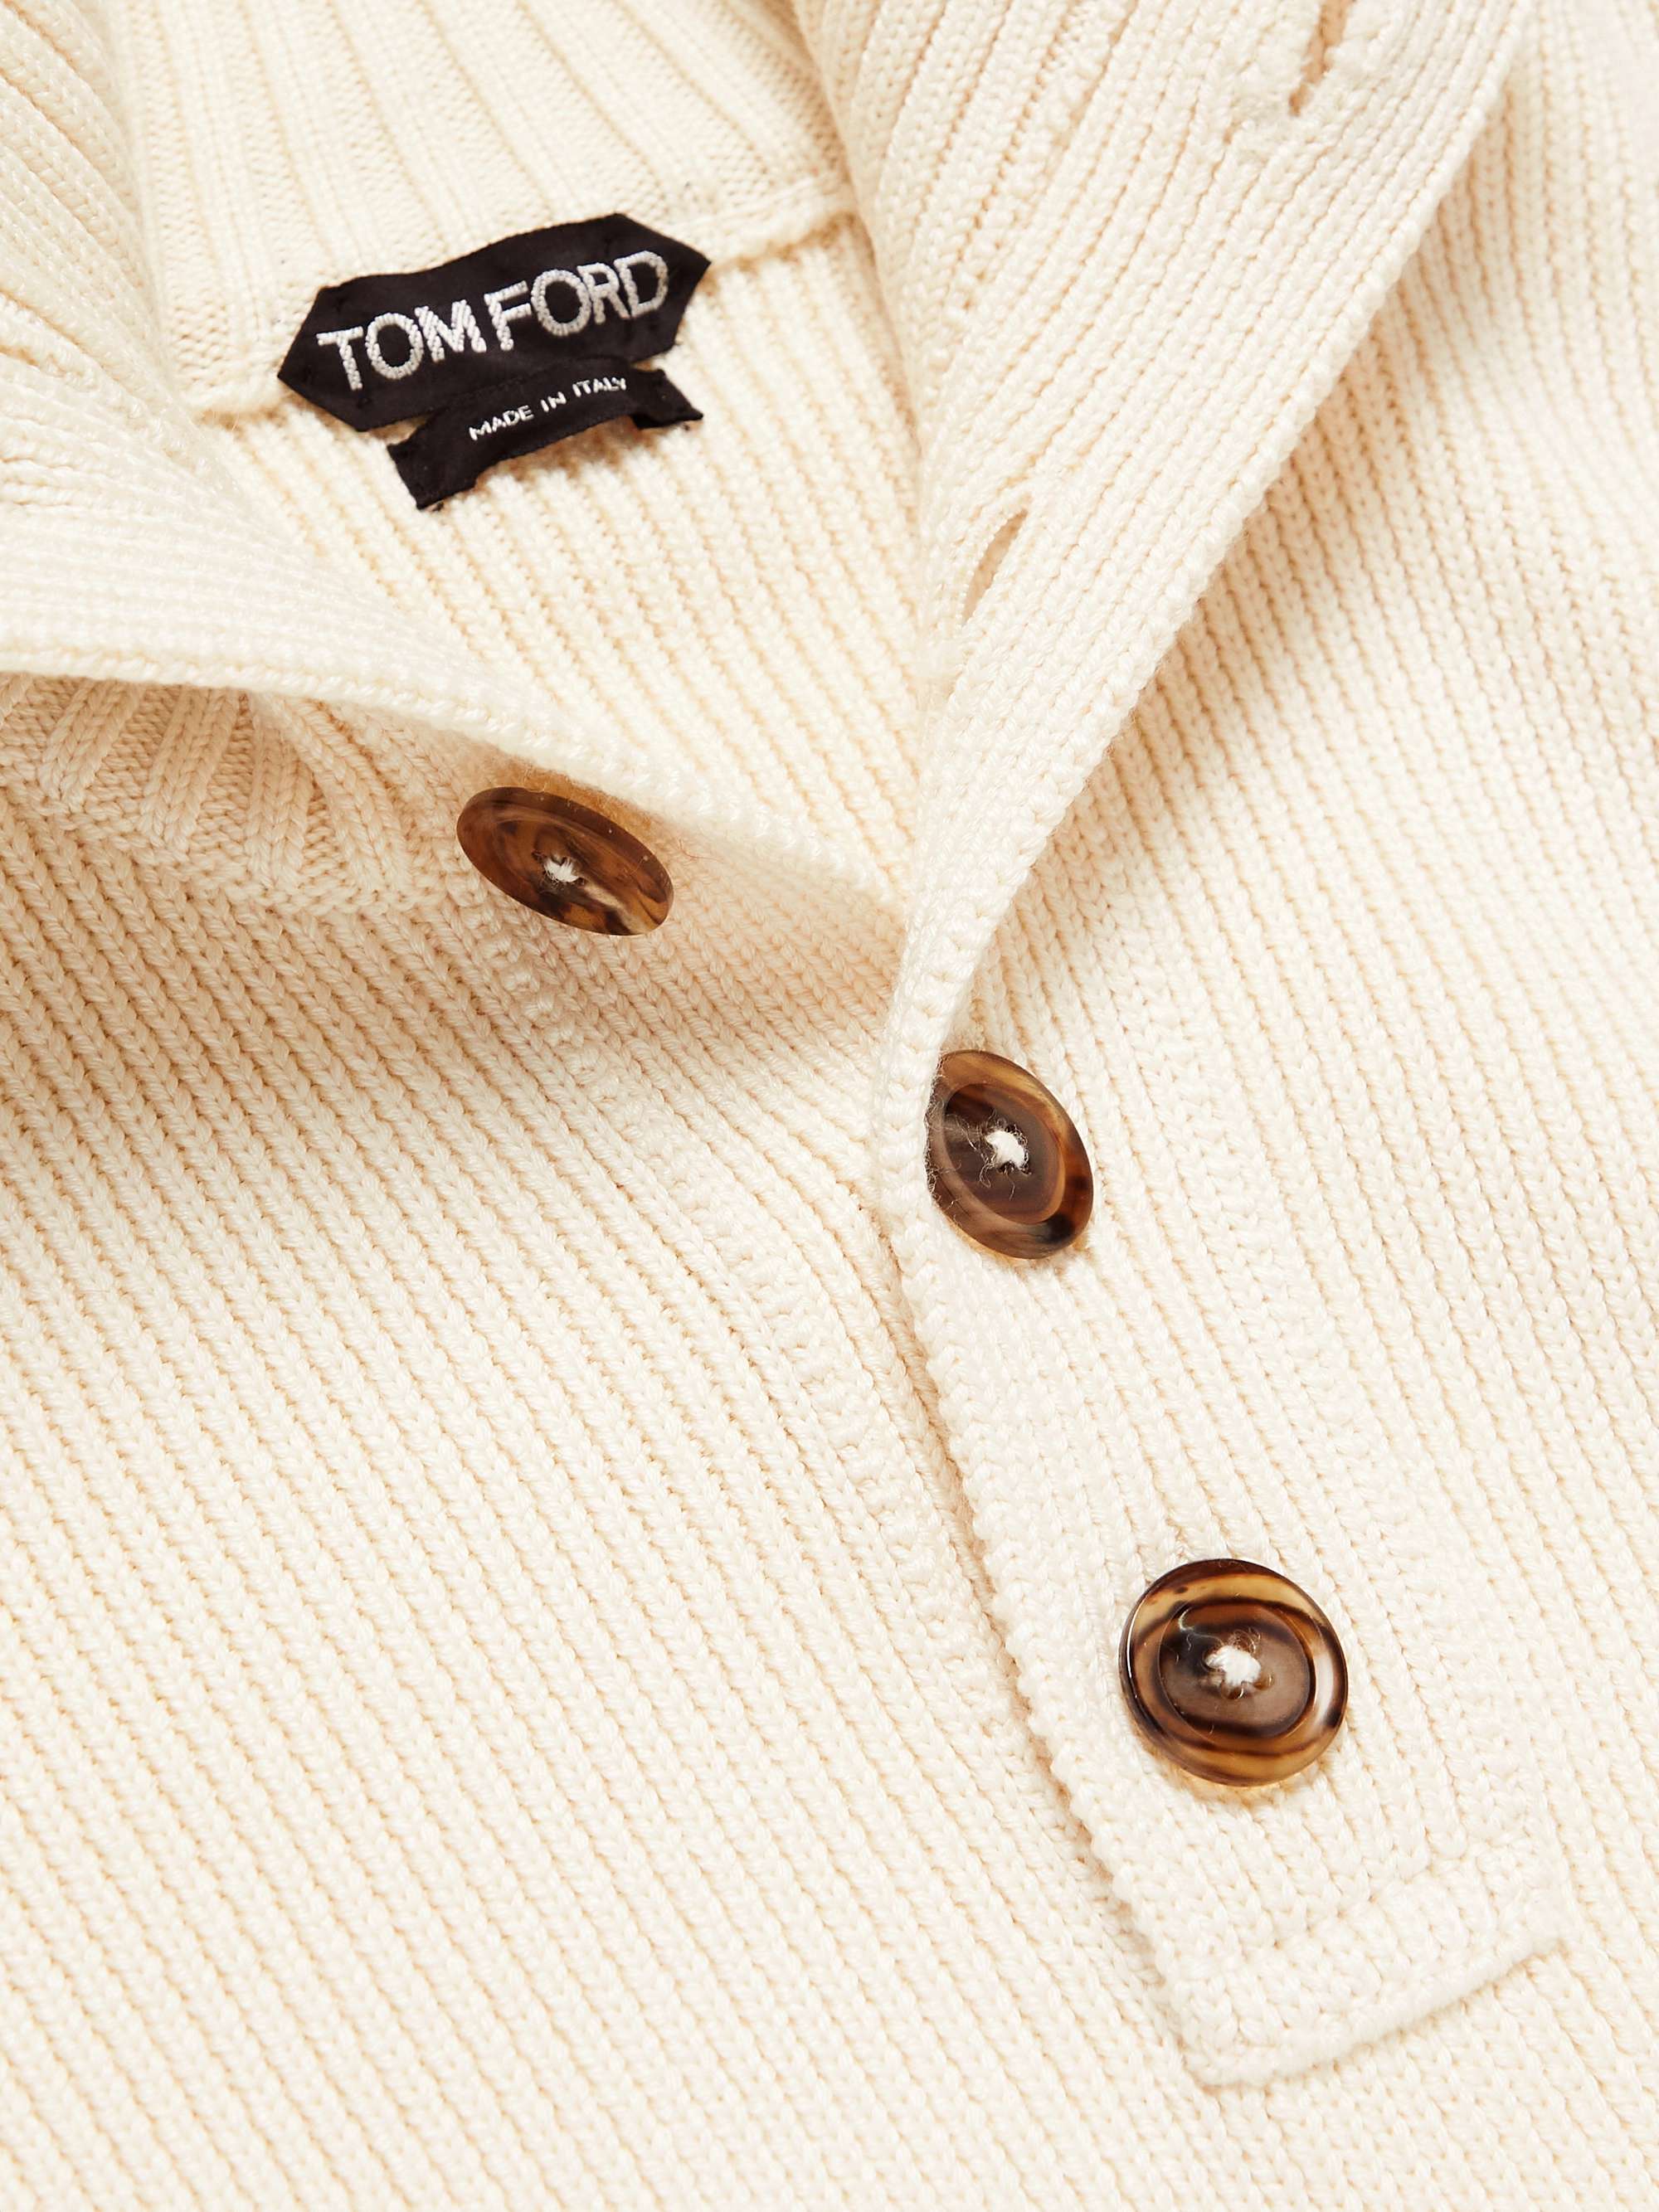 TOM FORD Wool and Silk-Blend Half-Placket Sweater